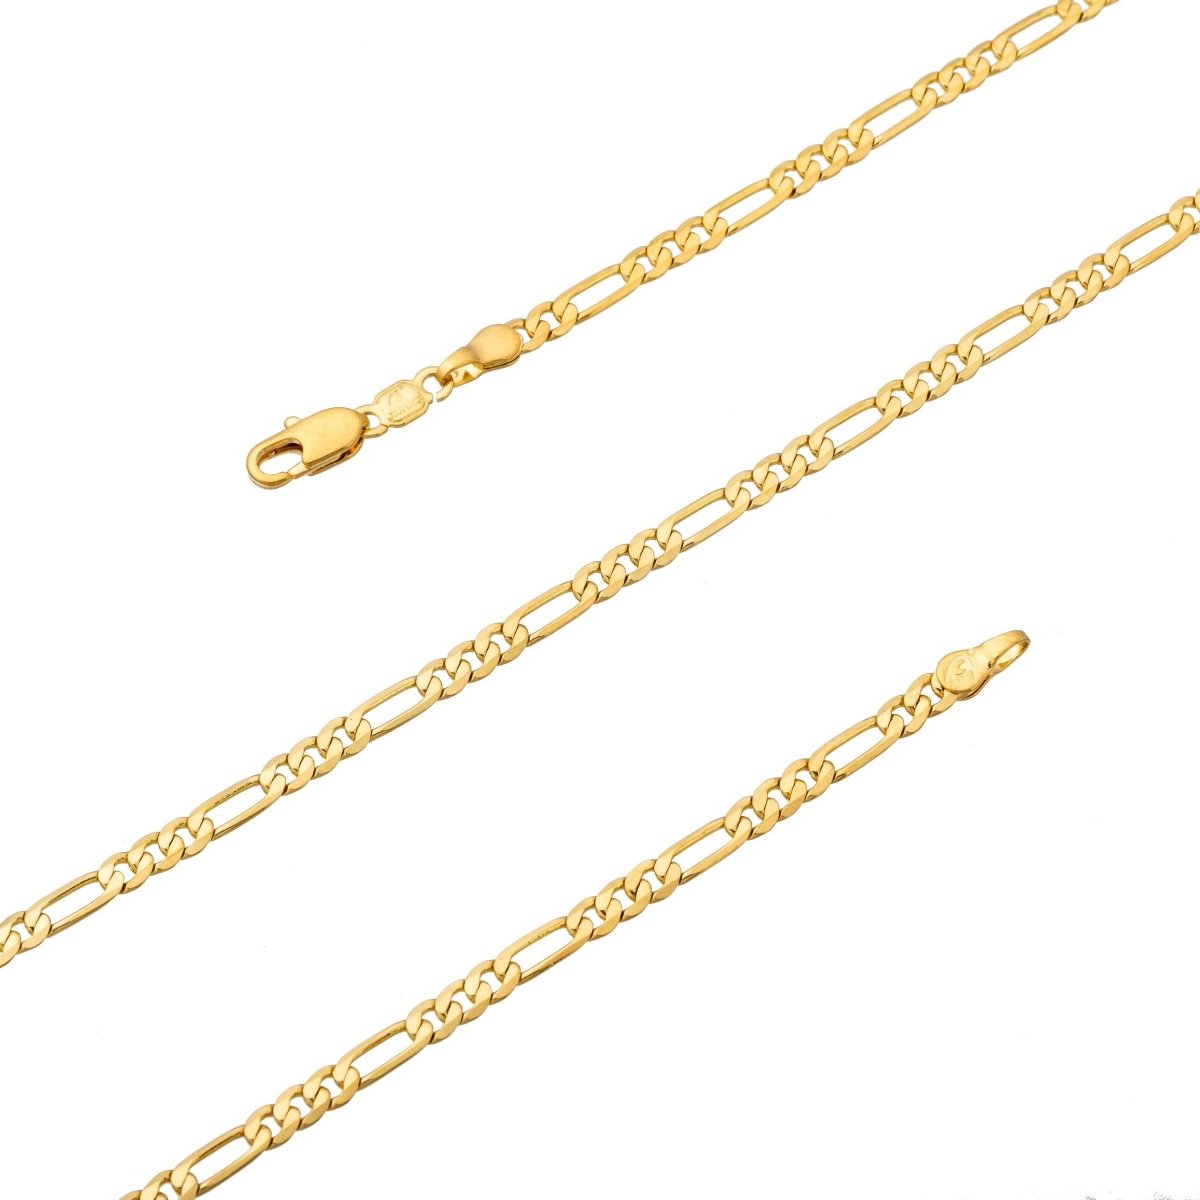 24K Gold Filled 4mm Flat Figaro Chain GF Finished Necklace 20" inch Gold Chain Finished Gold filled Chain Ready To Wear Chain Necklace, 3mm Figaro Necklace w/ Lobster Clasps | CN-483 Clearance Pricing - DLUXCA